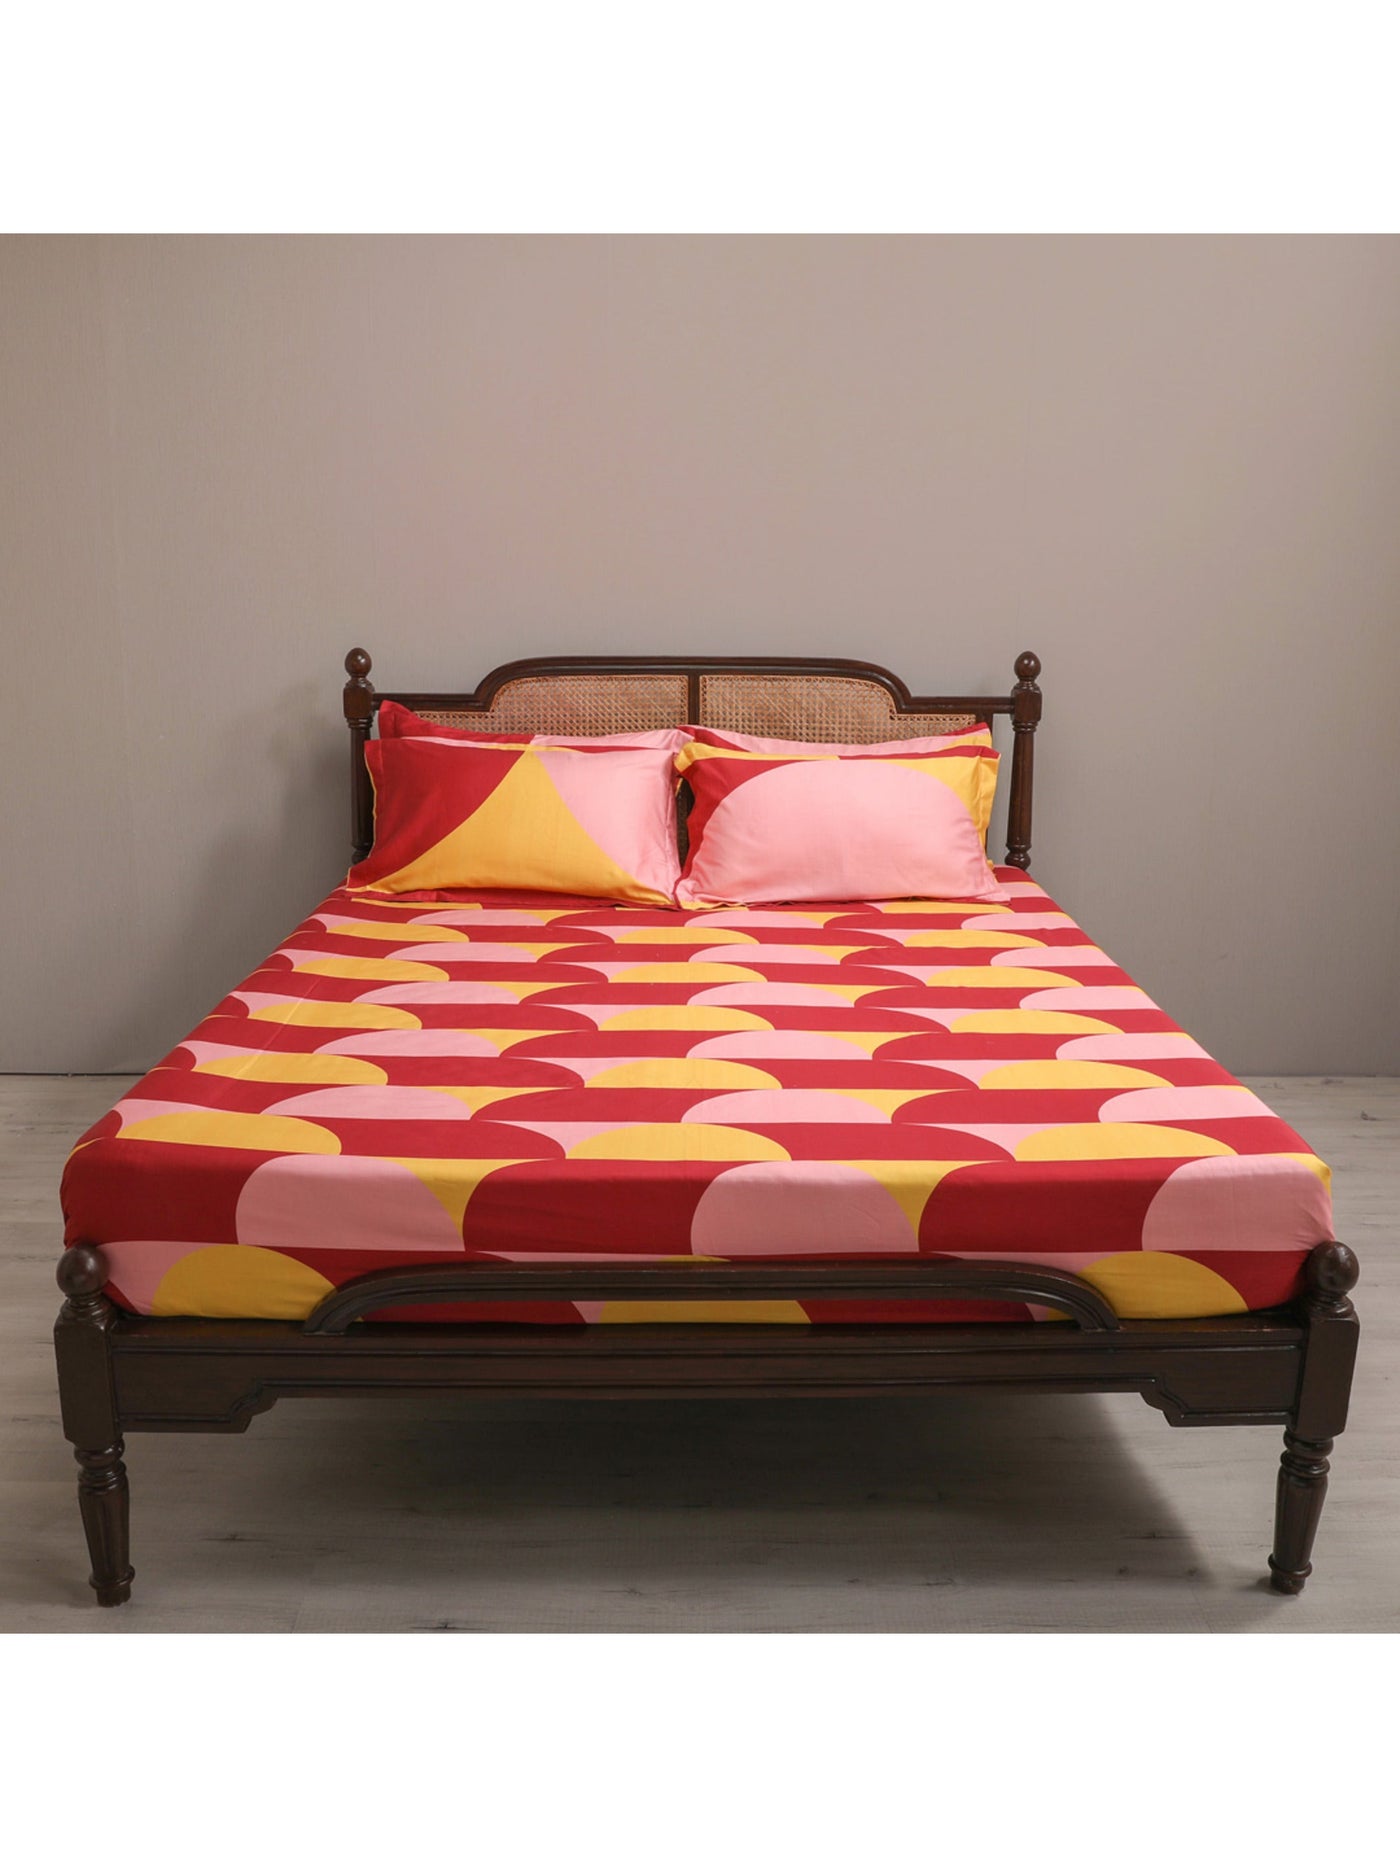 Bedsheet - The Echo In Hot Red